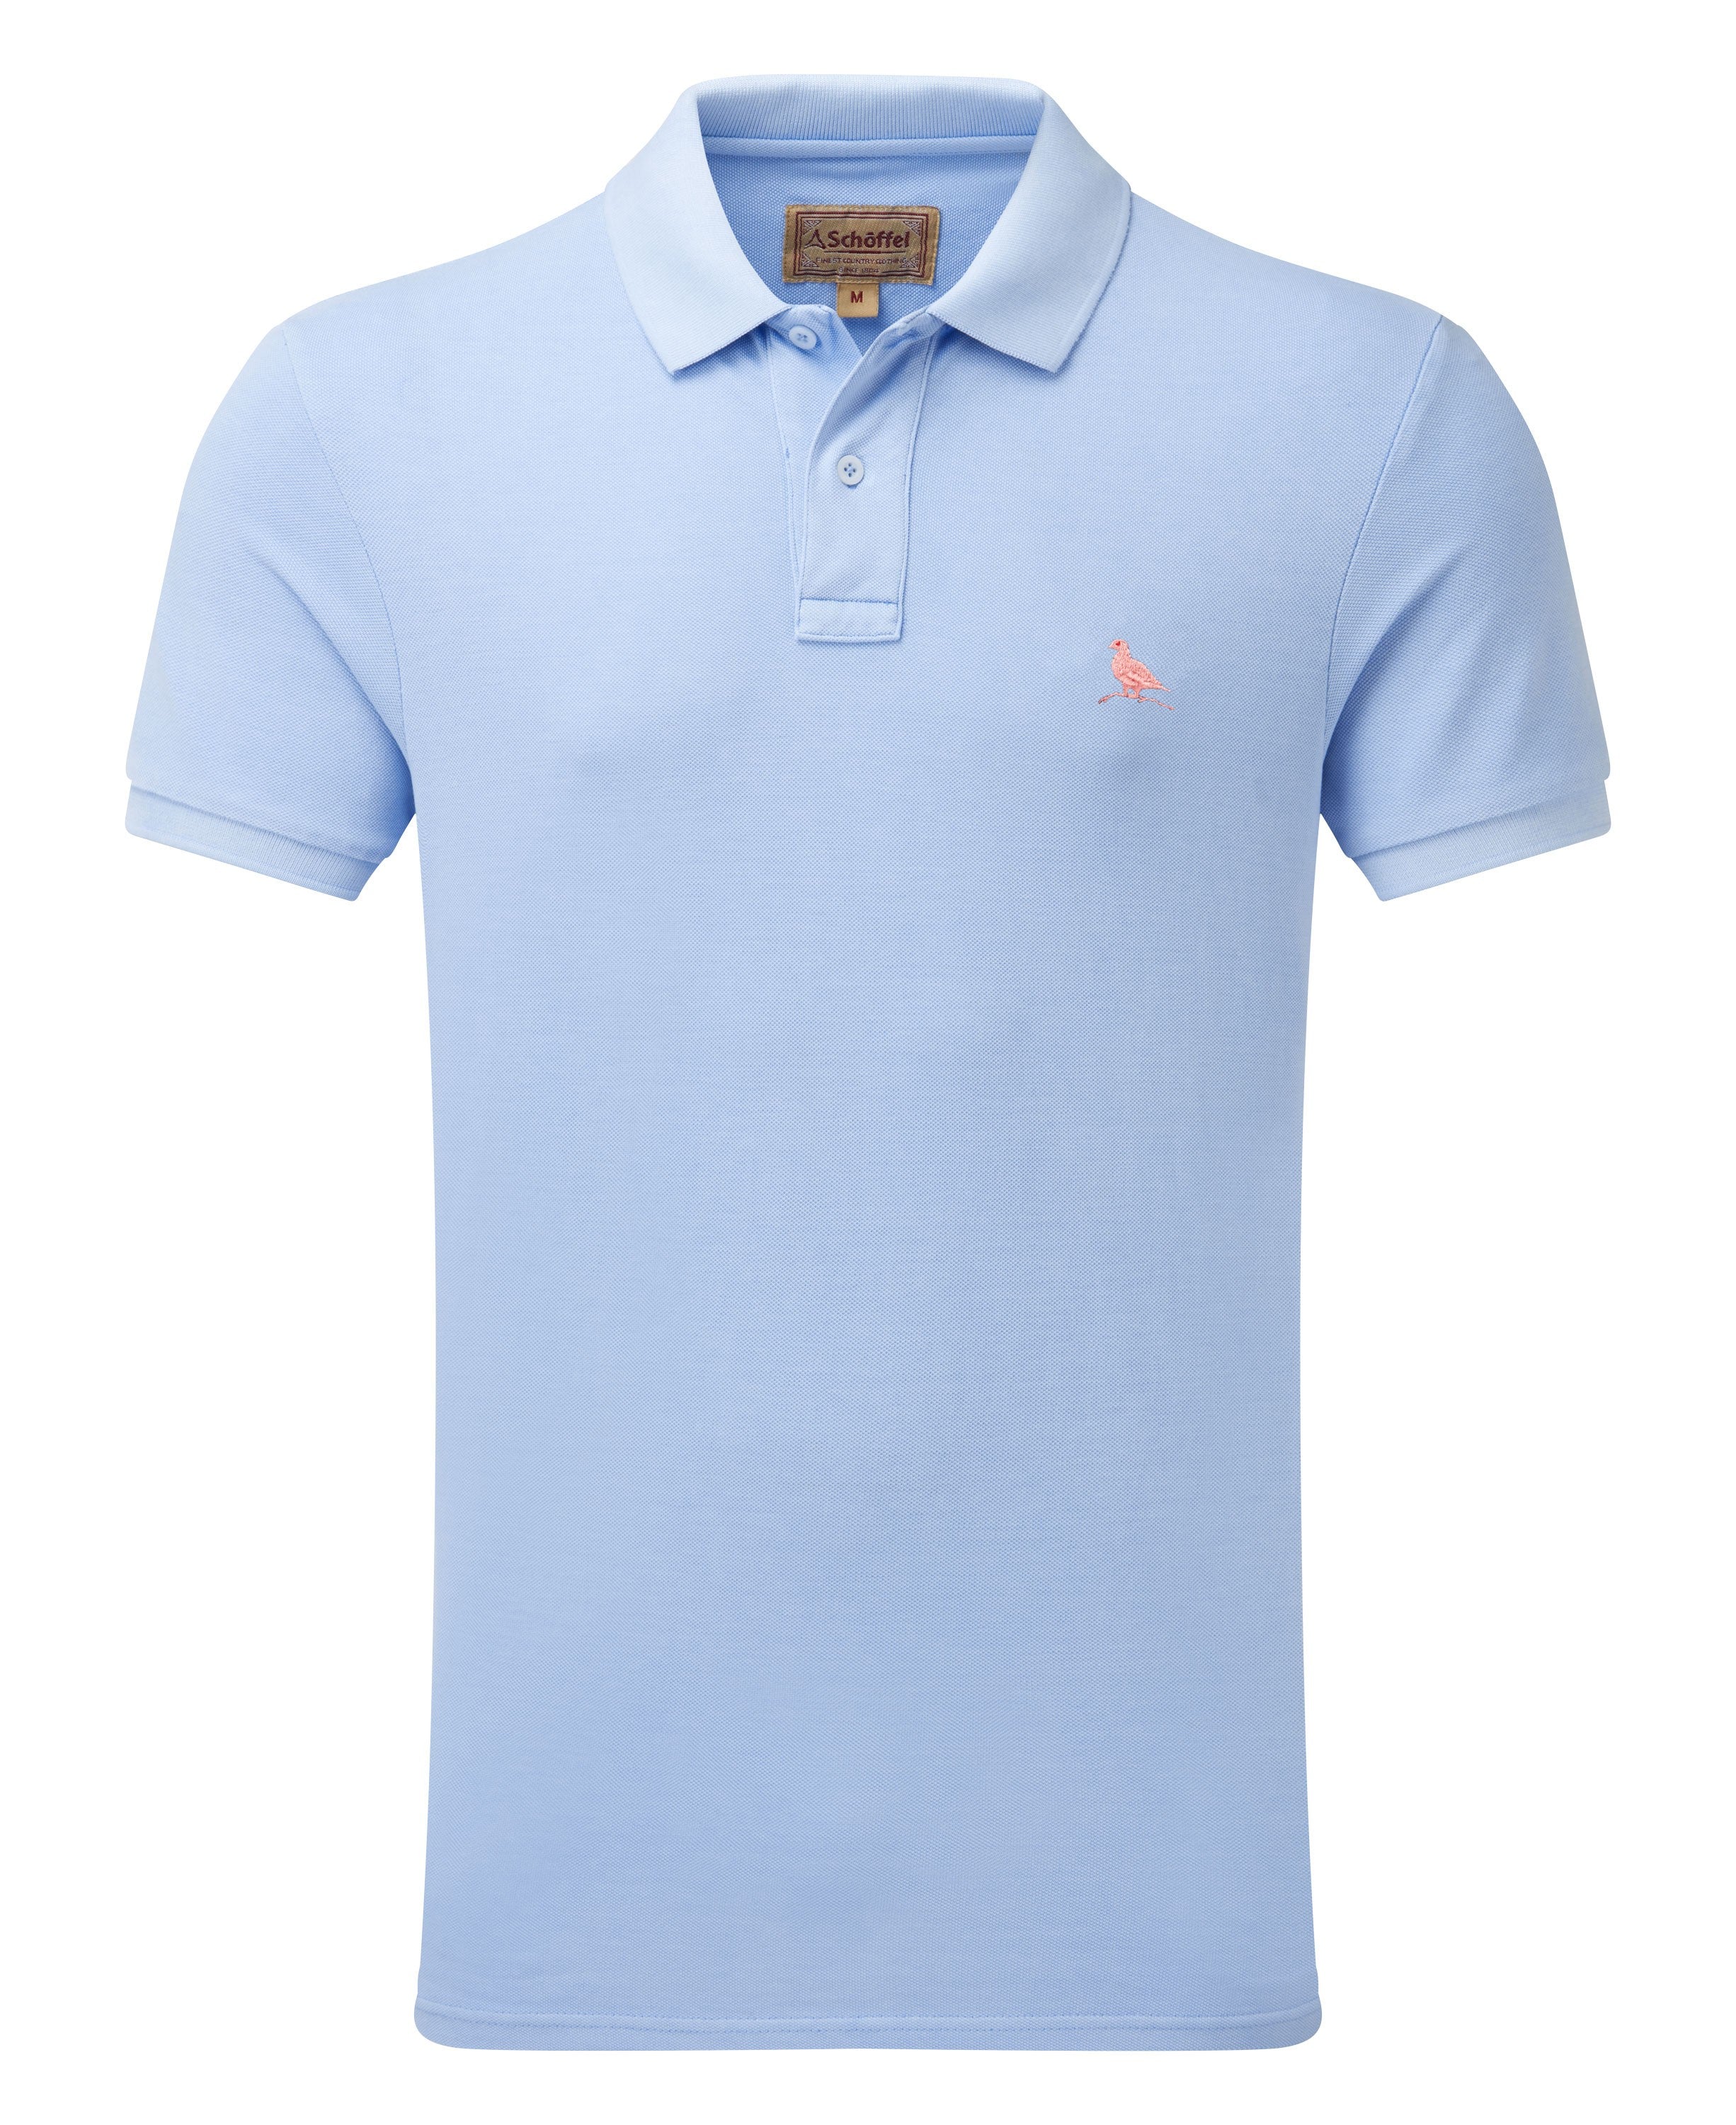 St Ives Garment Dyed Polo Shirt - Pale Blue